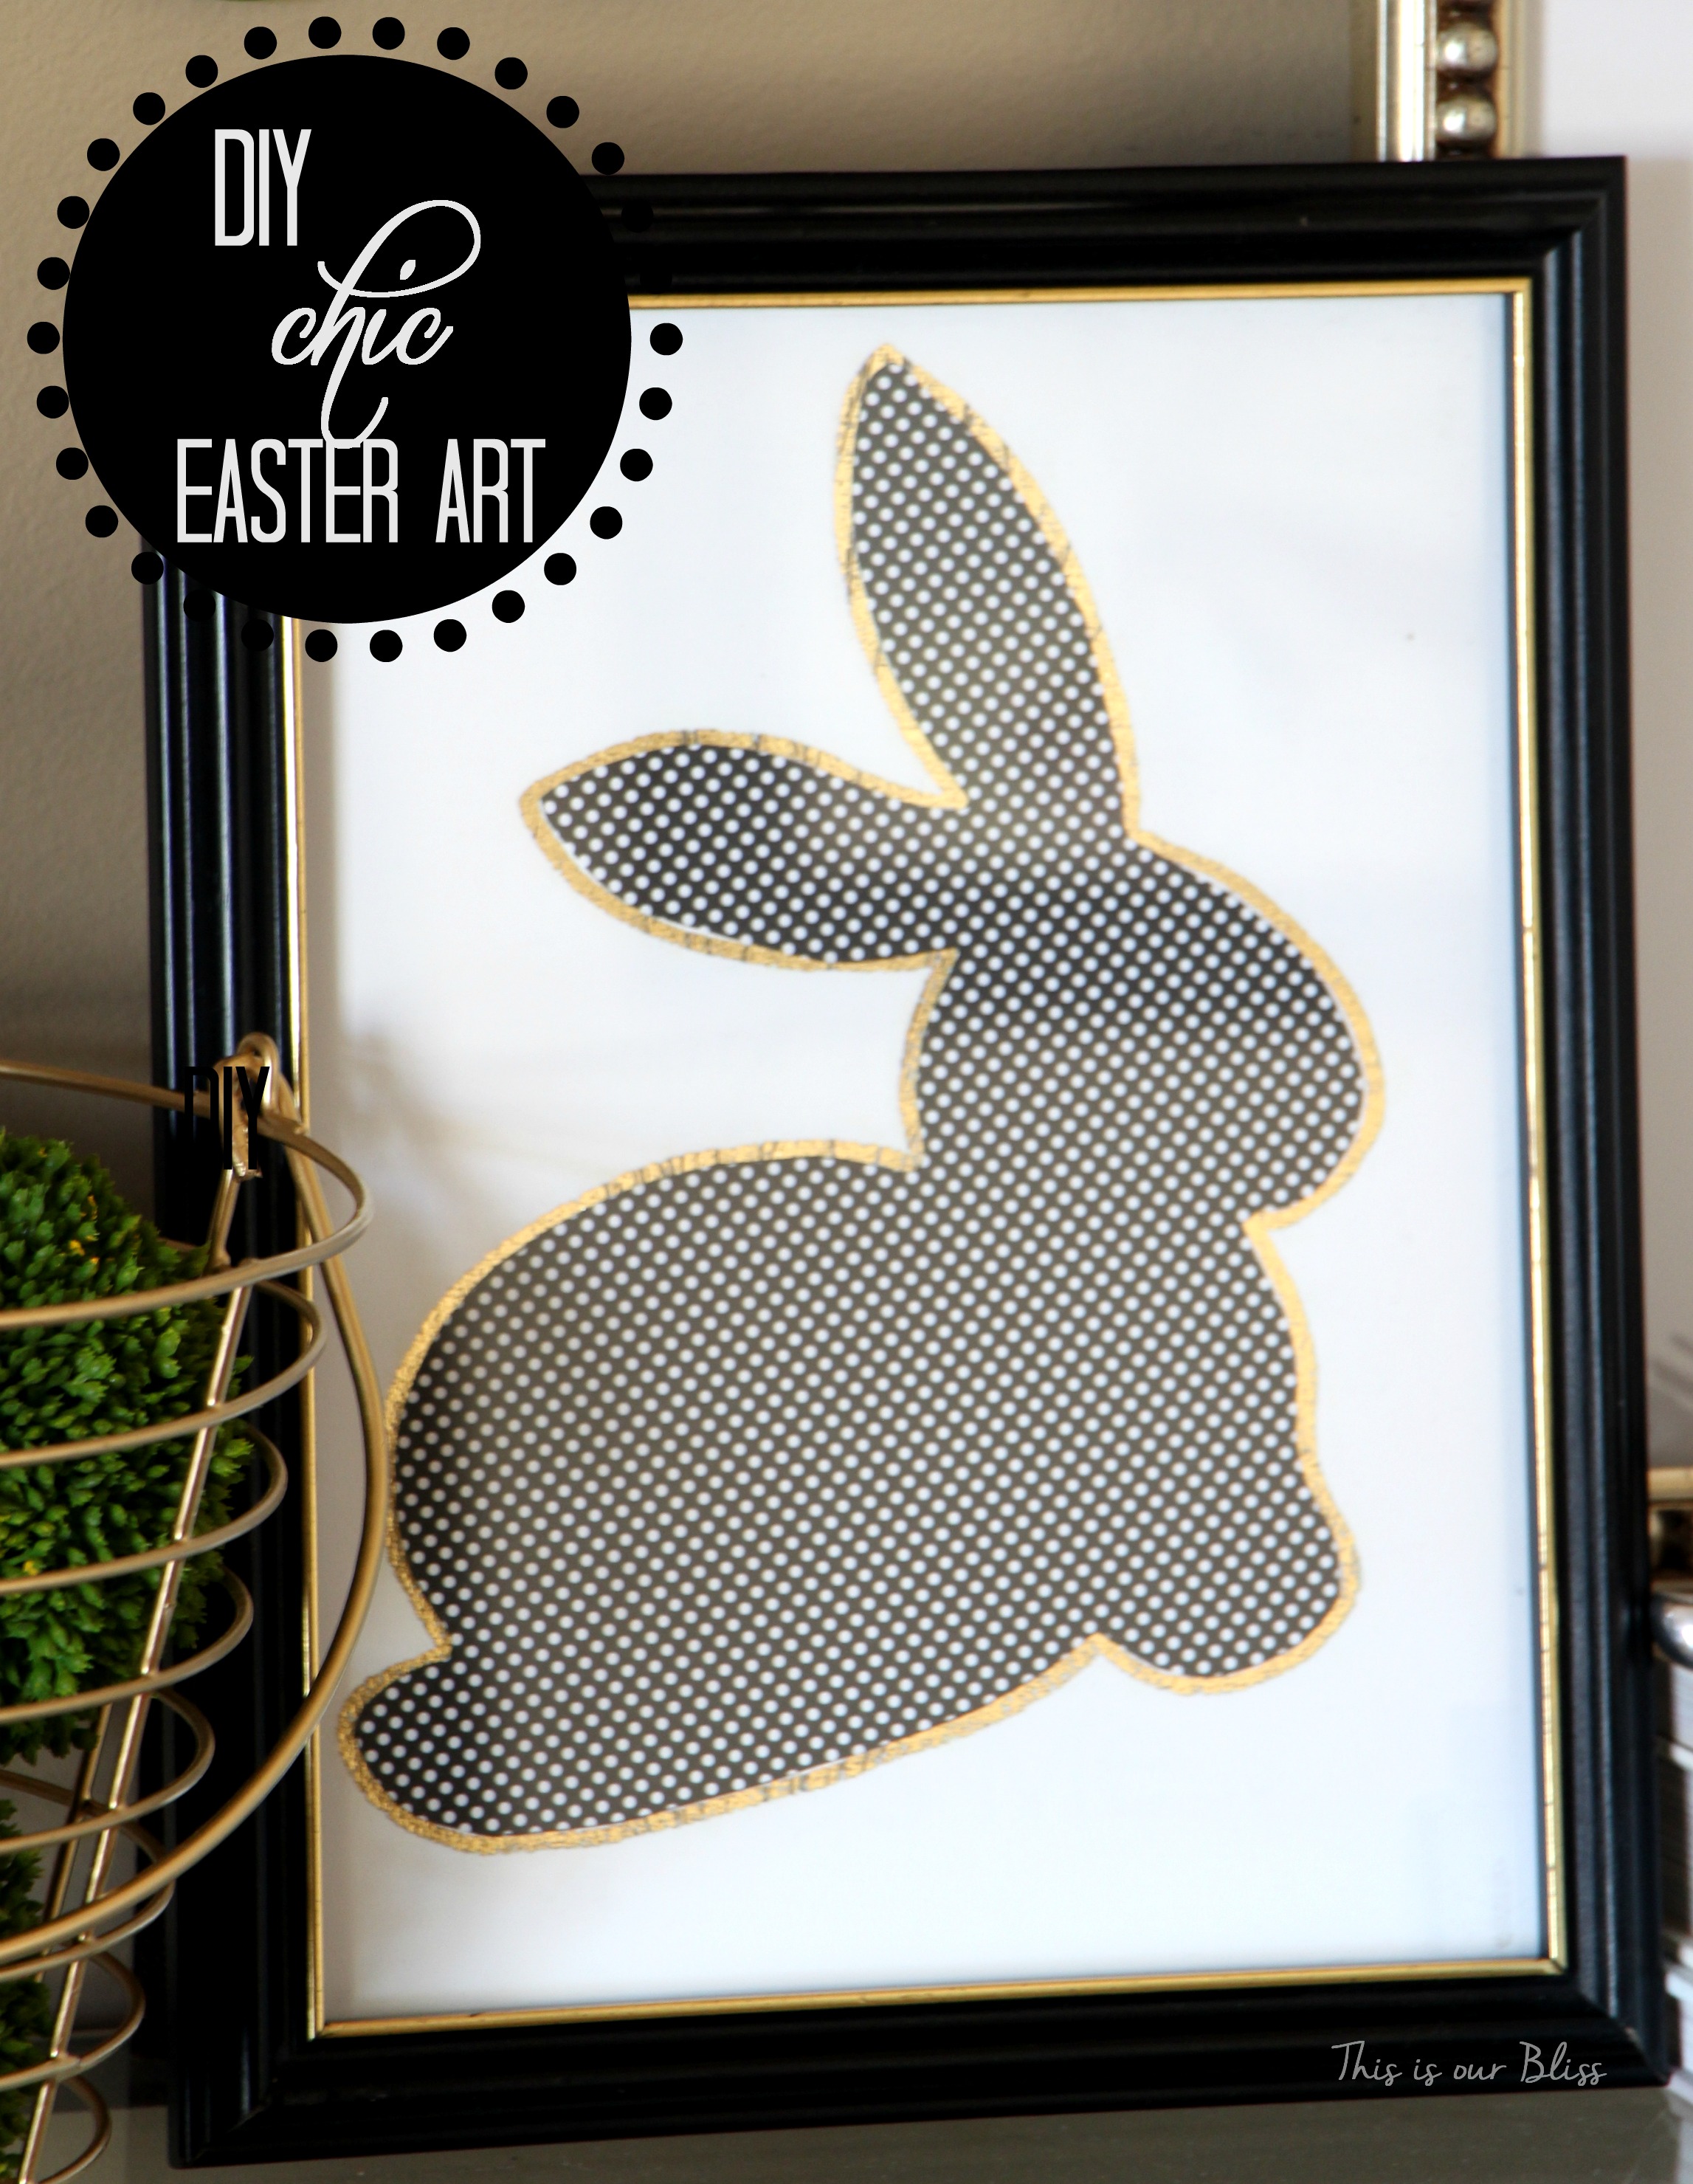 Bunny printable - trace onto paper - cut out to use as a stencil - DIY Chic Easter art - black white and gold - This is our Bliss